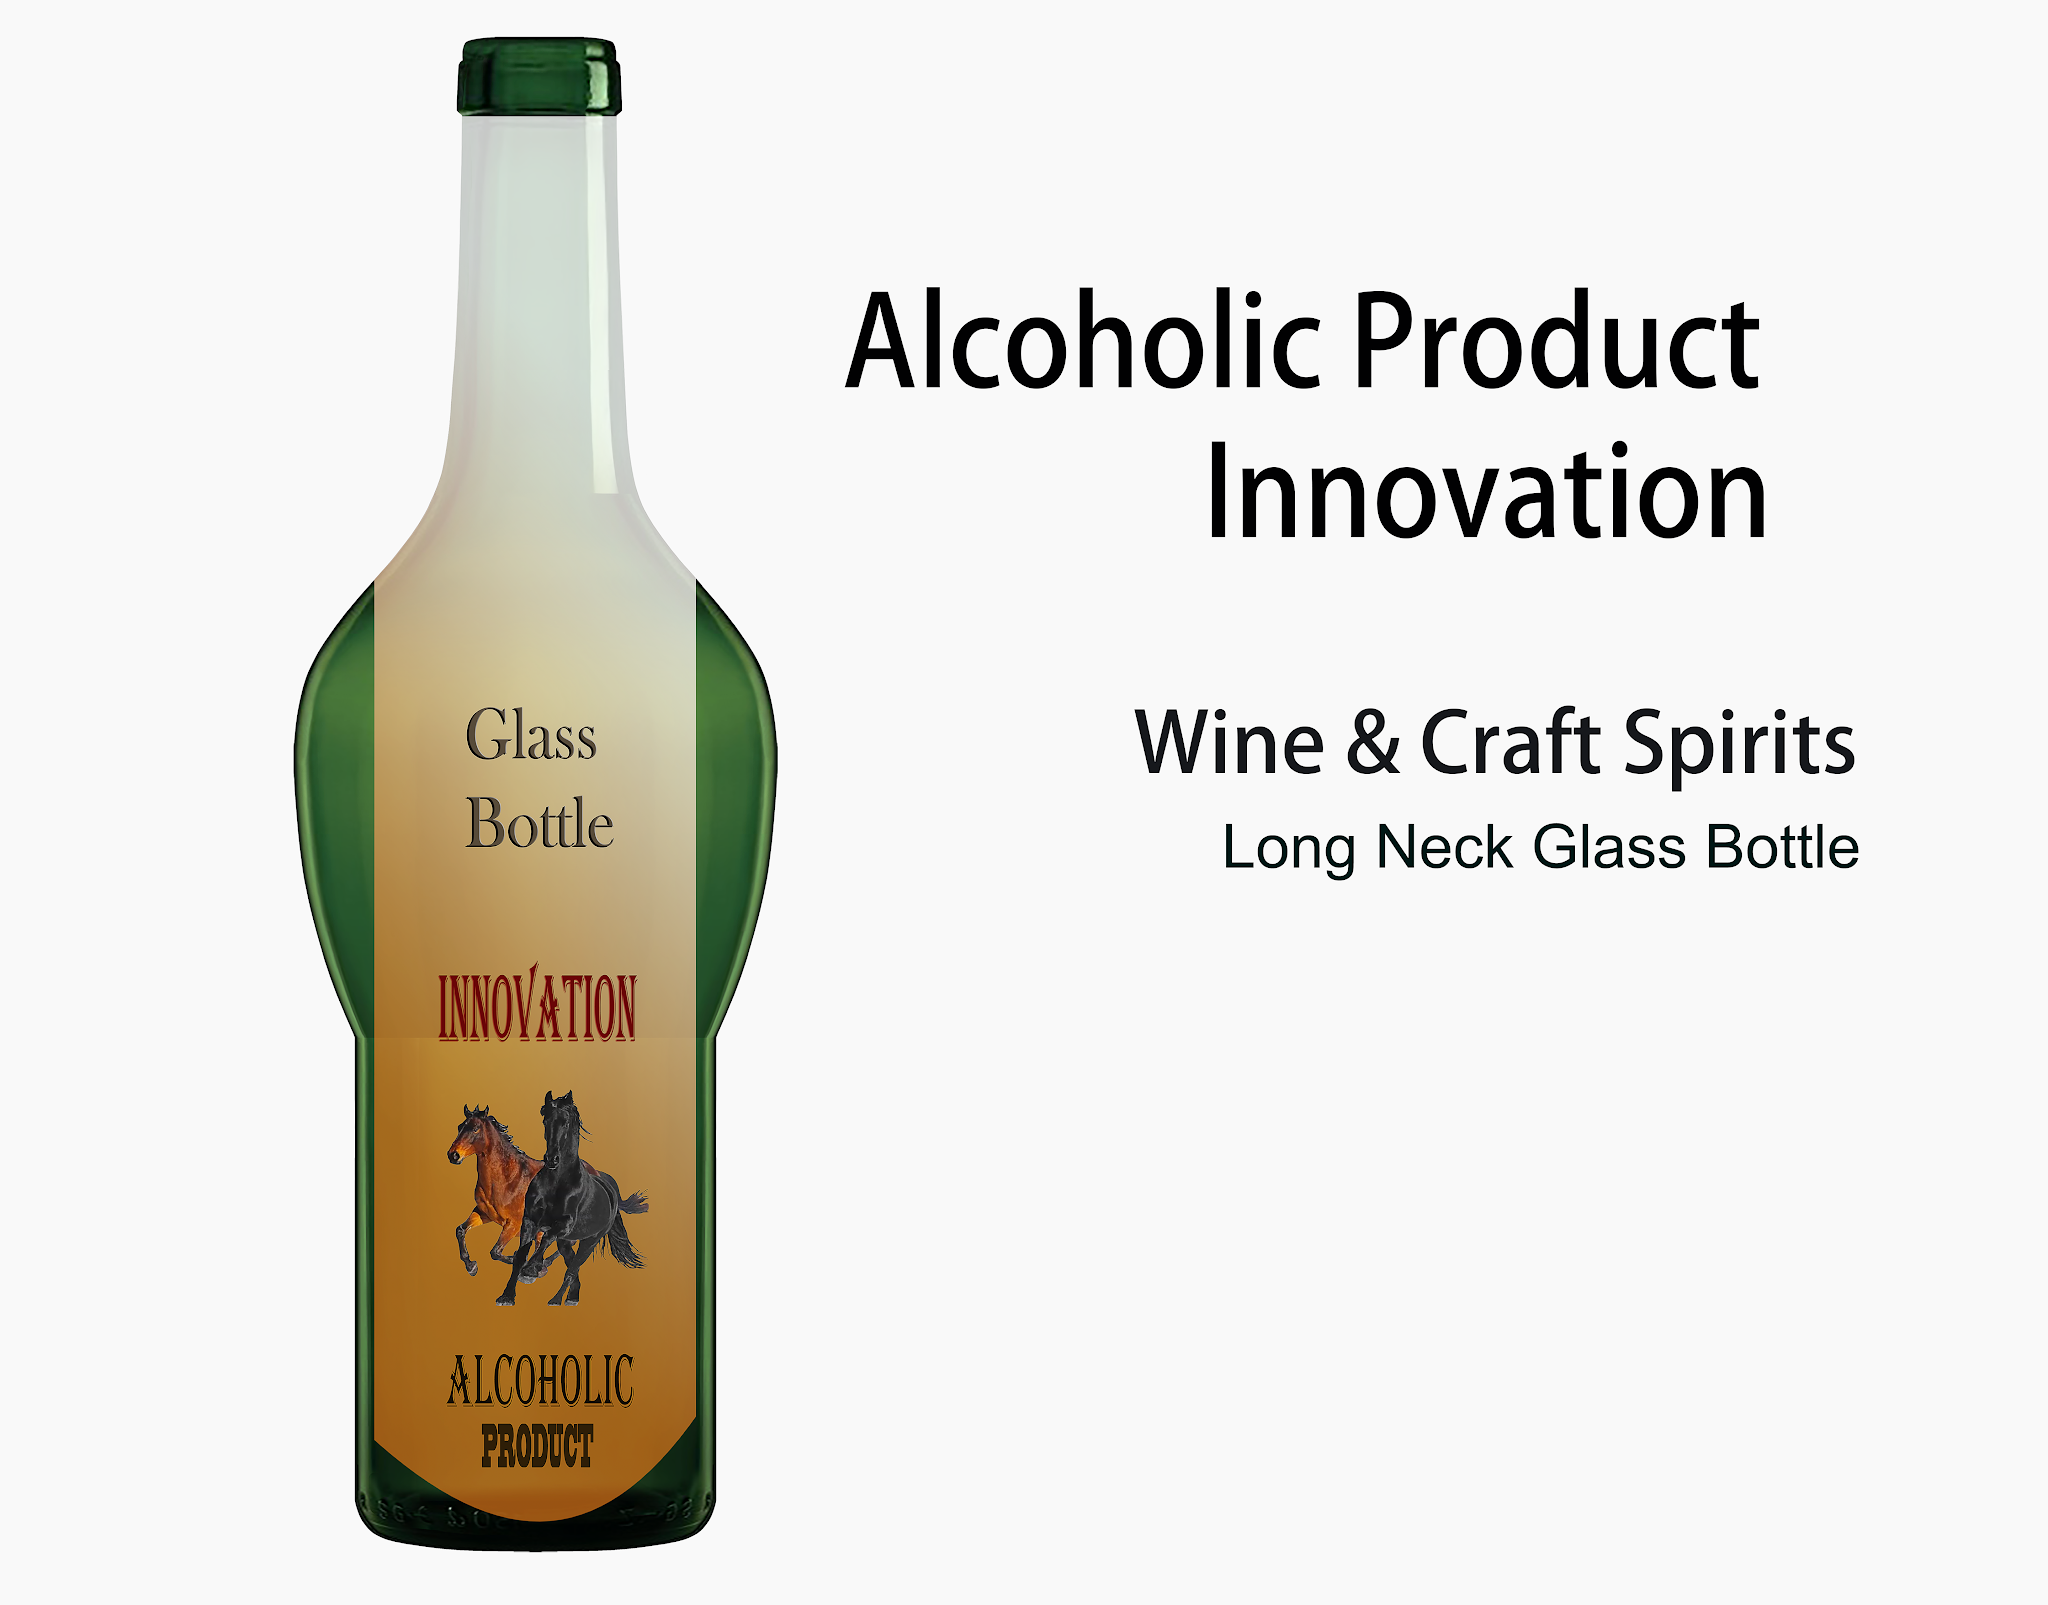 Glass to preserve and protect, when it comes to wine, craft spirits and beer.